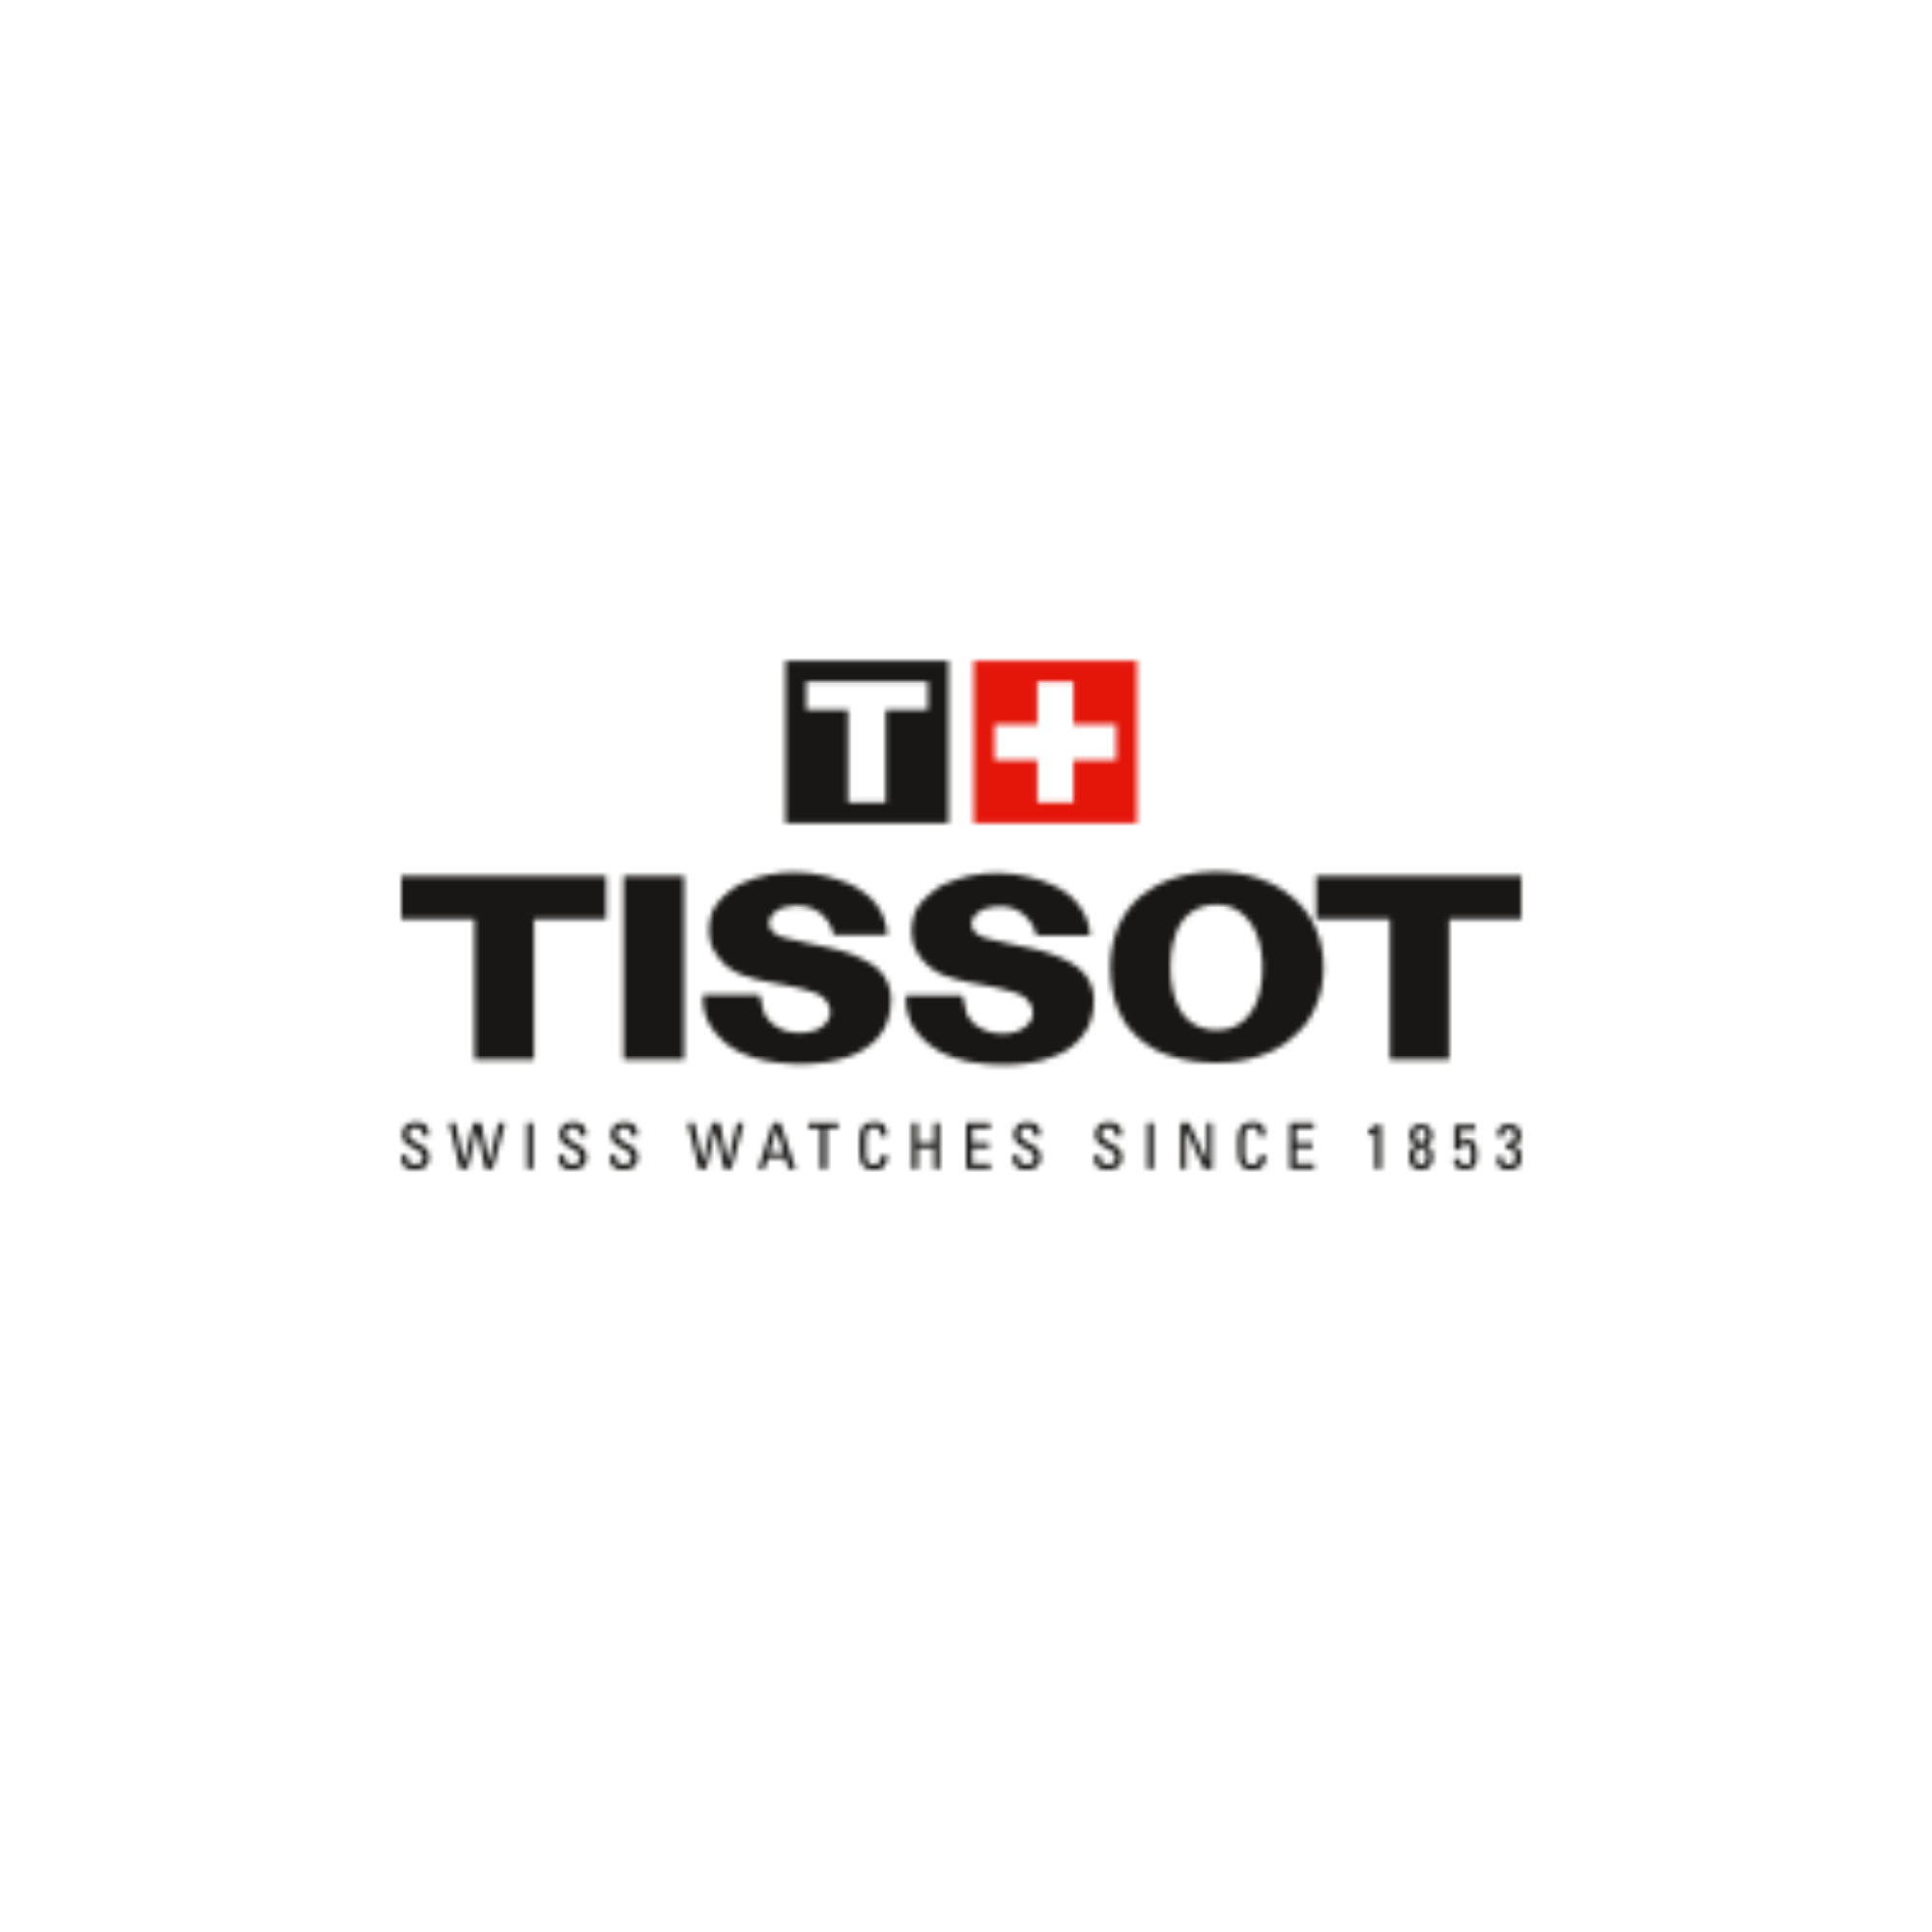 Tissot watches at Henne Jewelers